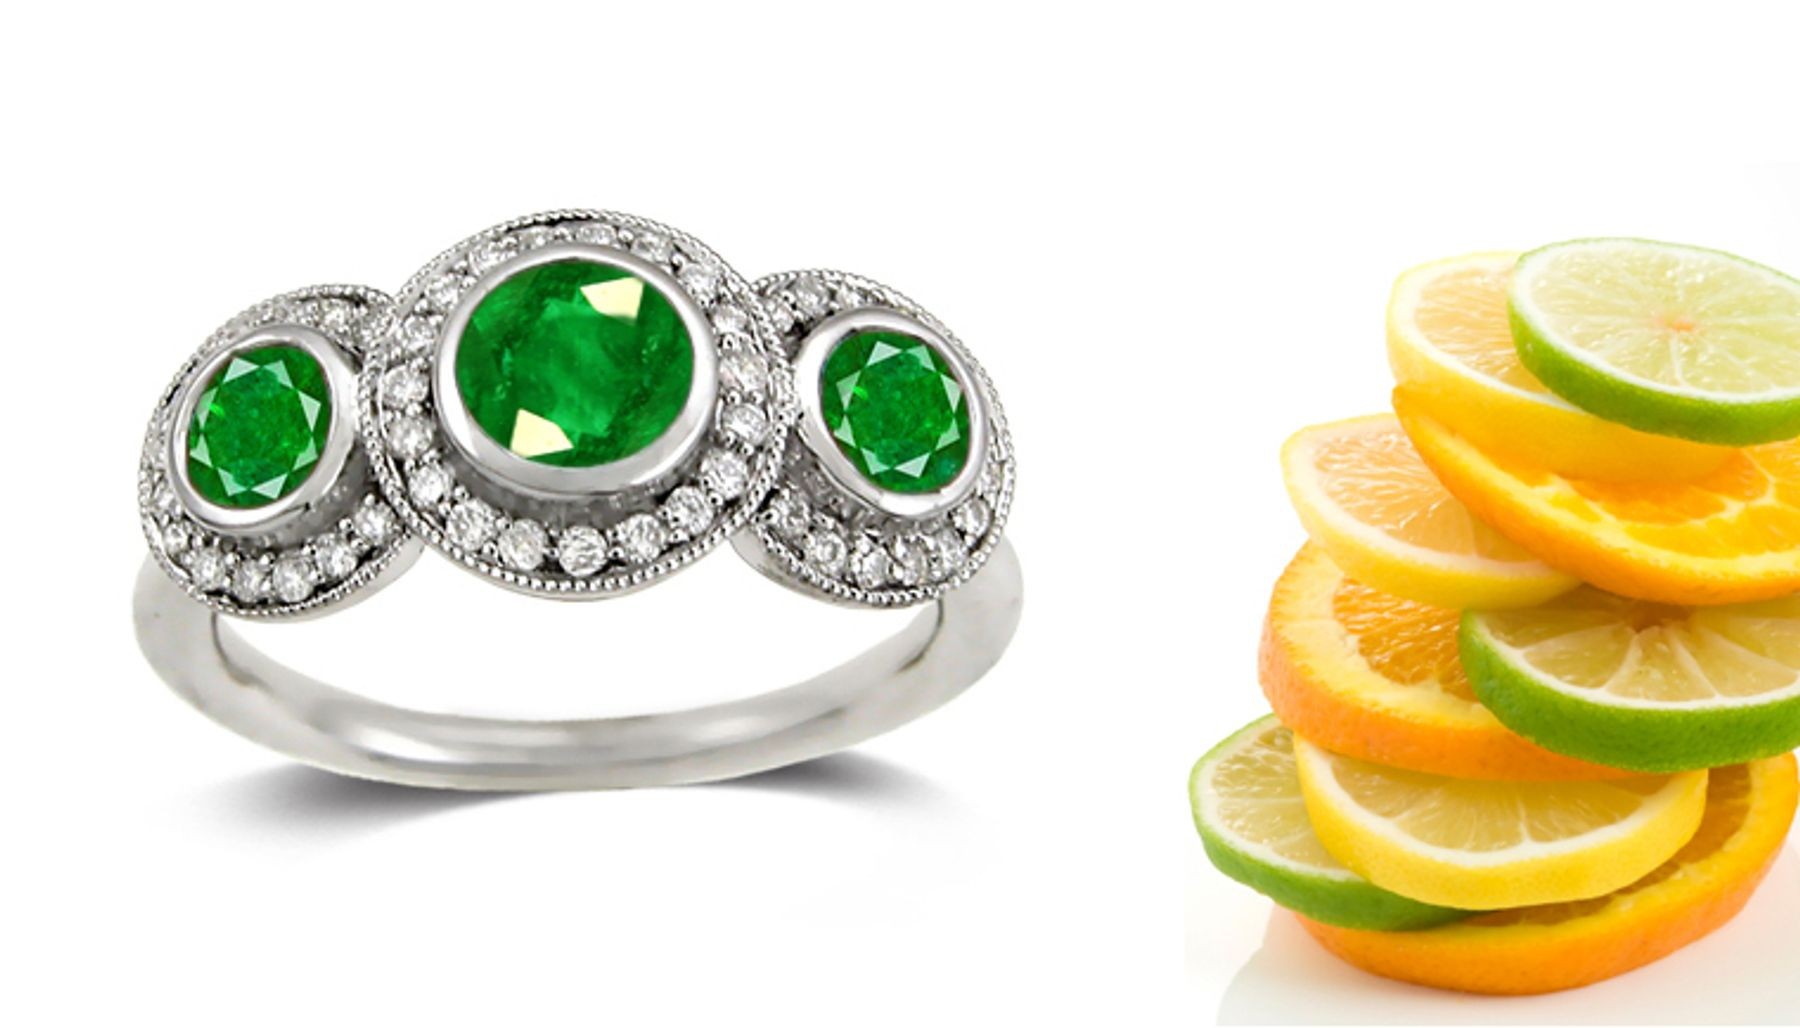 Originality of Designs: A Rich Green Round Emerald with French Pave Diamond Bordering around The Center Emerald Enclosedr